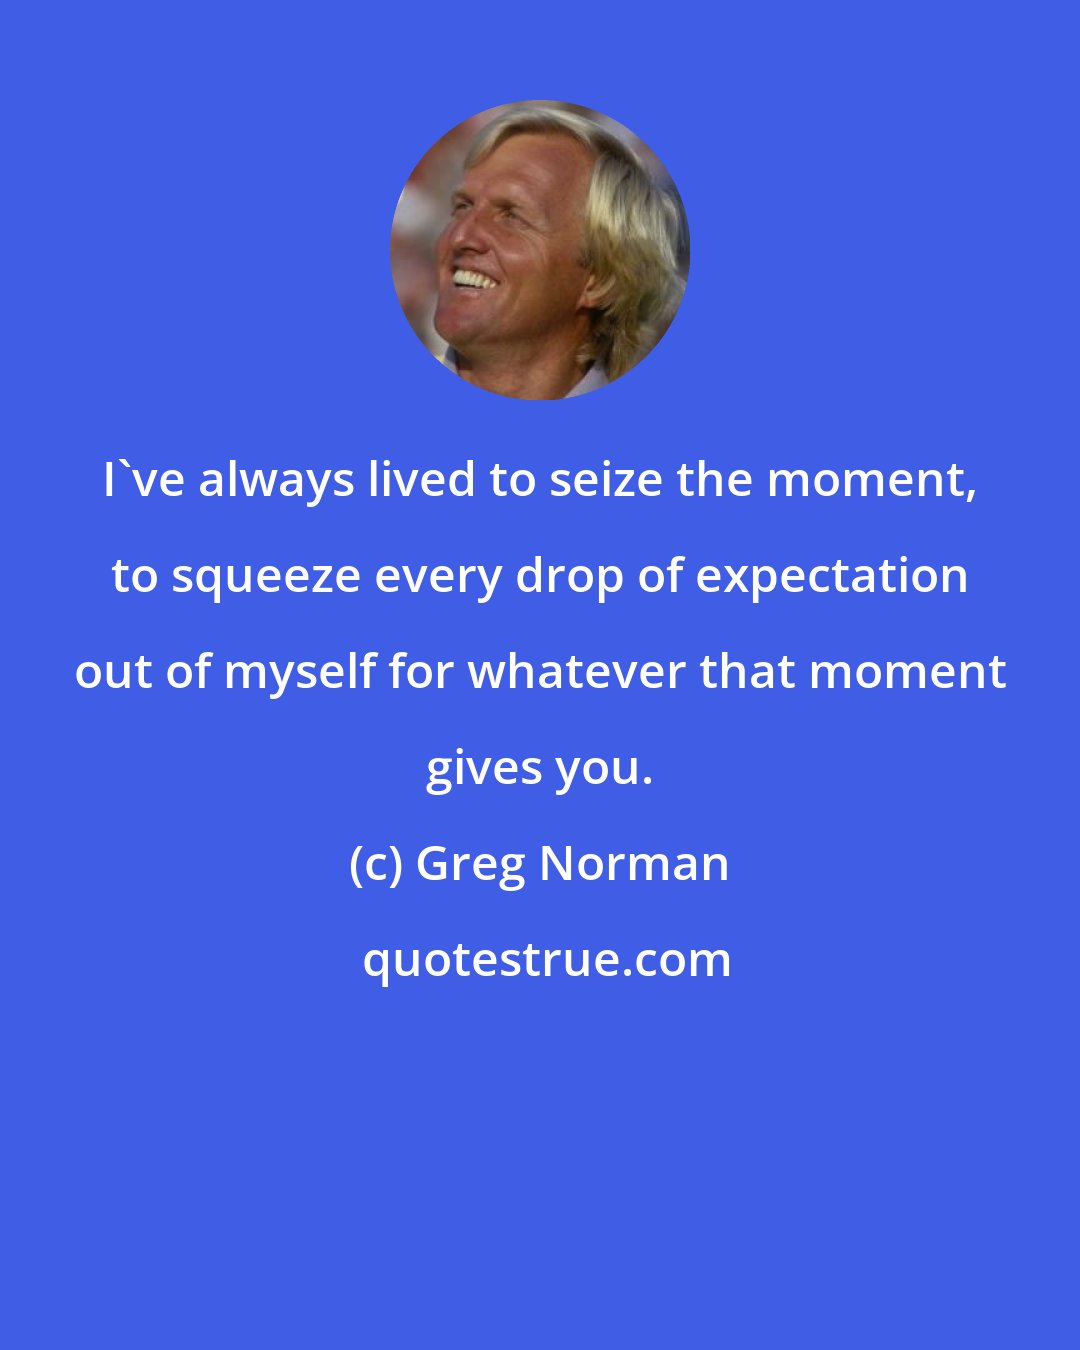 Greg Norman: I've always lived to seize the moment, to squeeze every drop of expectation out of myself for whatever that moment gives you.